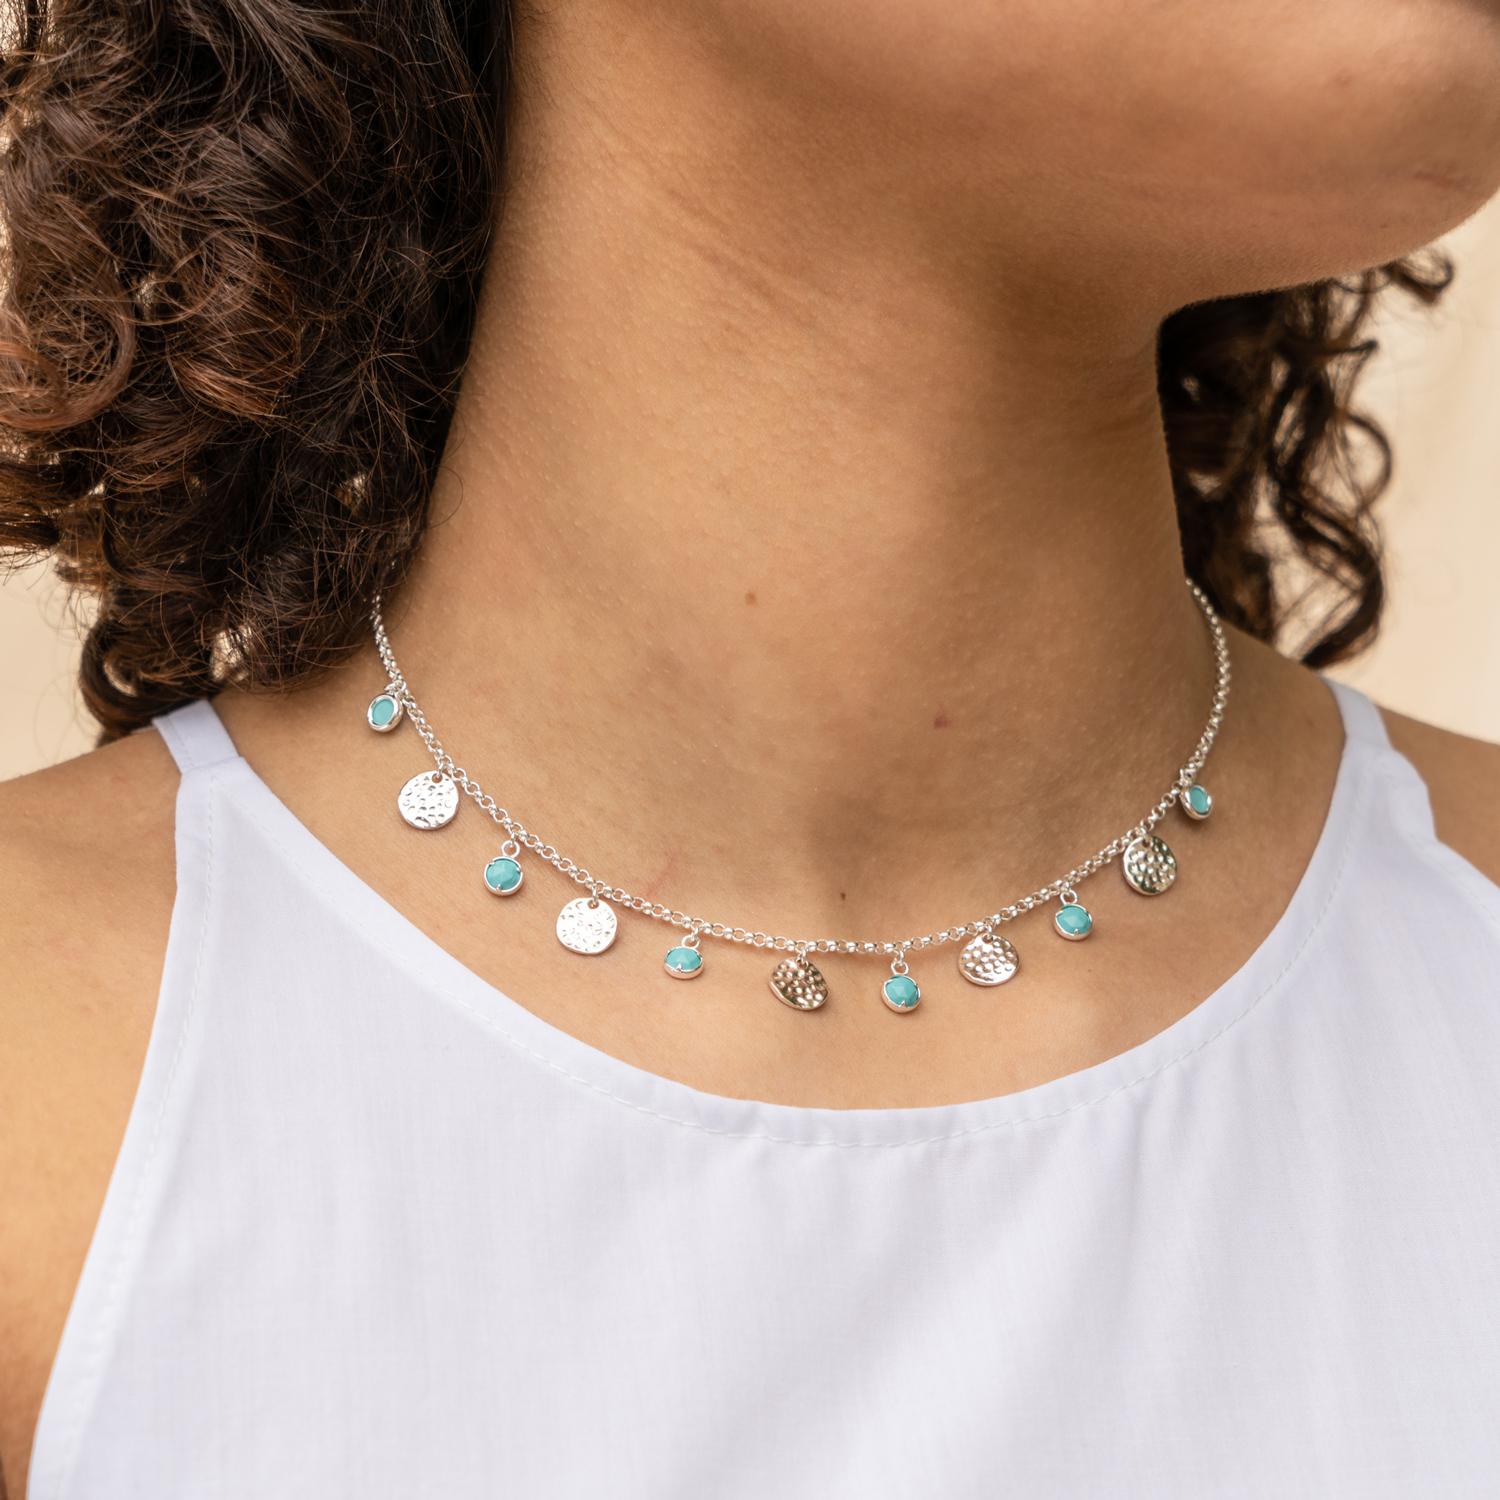 A modern take on traditional opulence, this sterling silver necklace teams 6 gorgeous turquoise drops alongside 5 hammered discs. The necklace stands out effortlessly and pairs beautifully with sun-kissed skin. The necklace is on a sterling silver